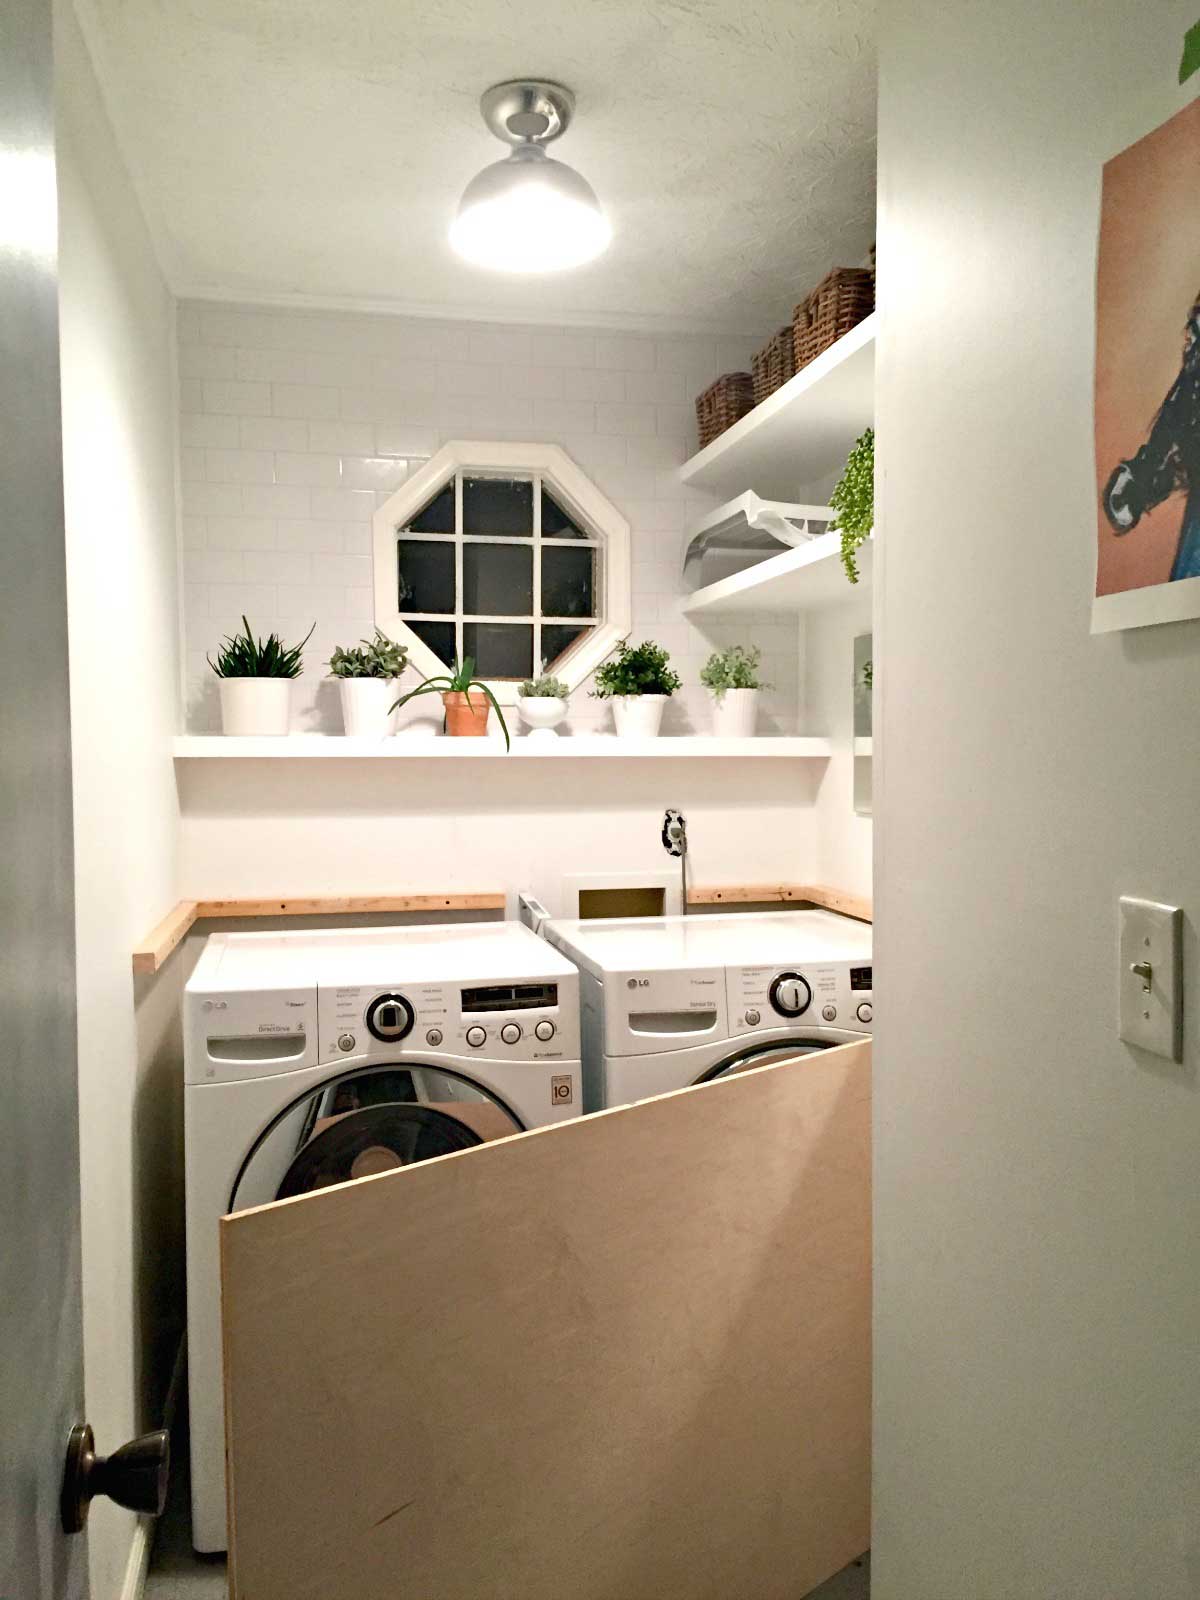 DIY Plywood Counter Top for the Laundry Room - Featuring Vintage Revivals